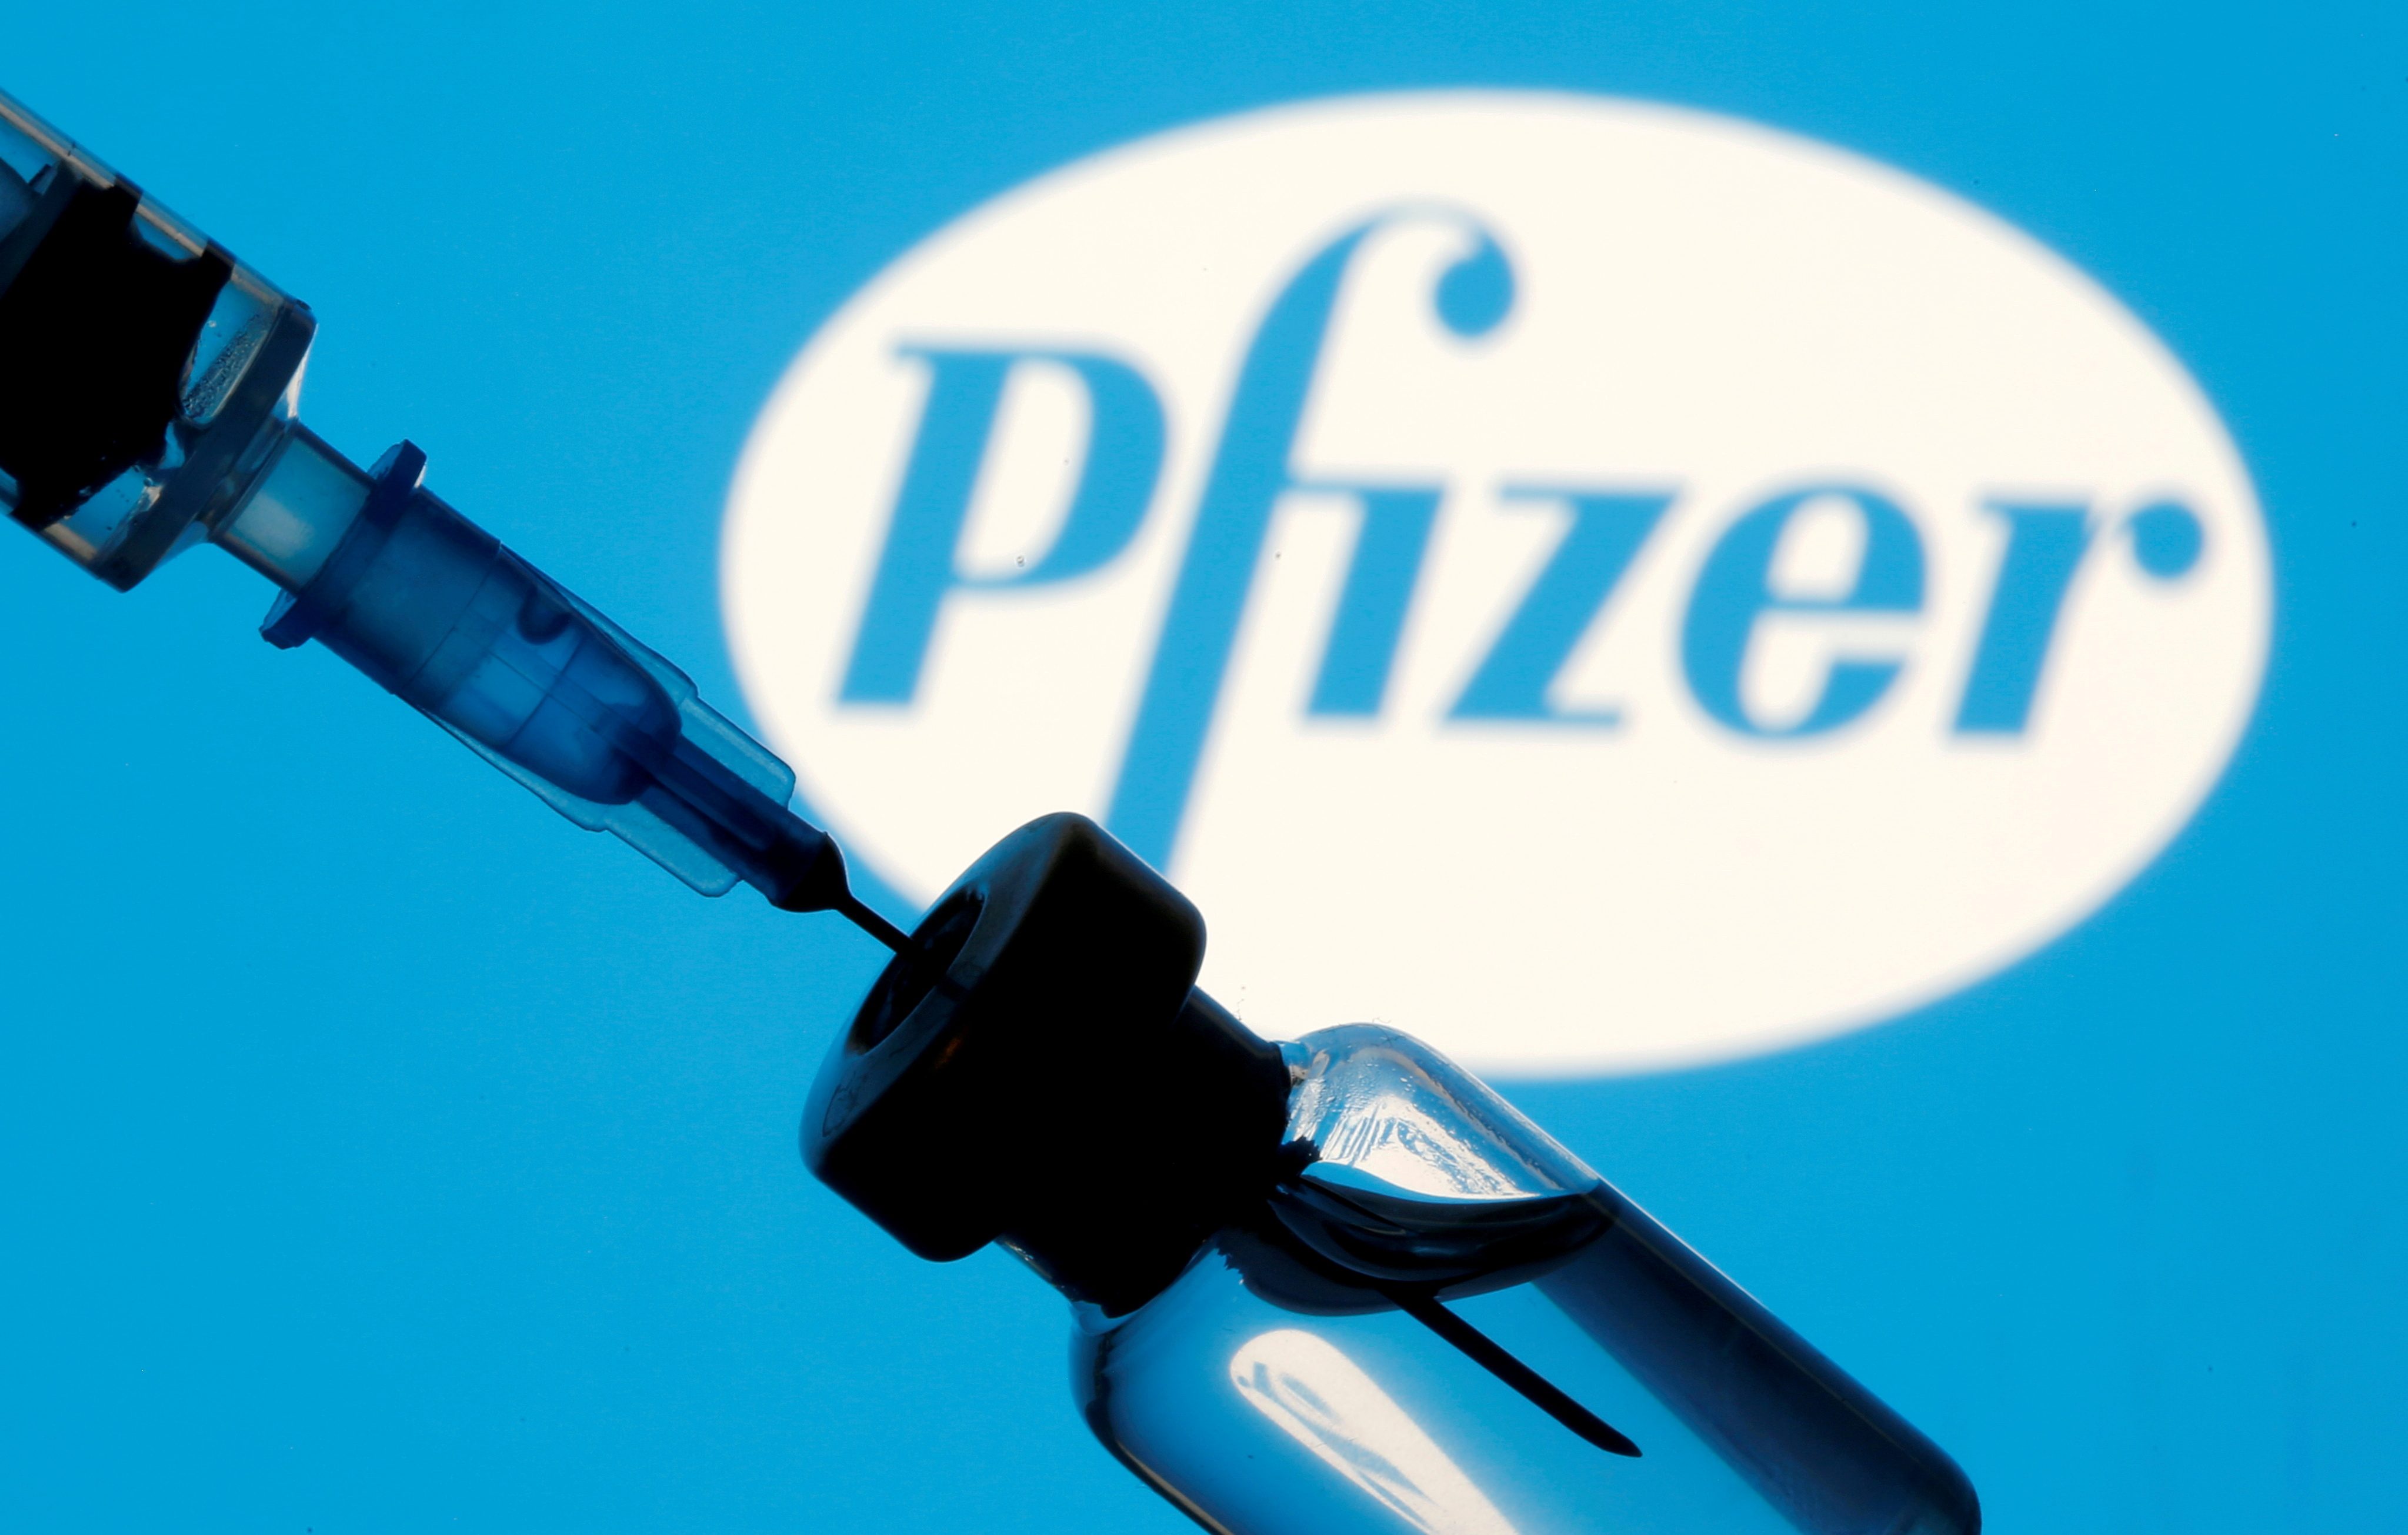 Israel sees probable link between Pfizer vaccine and myocarditis cases